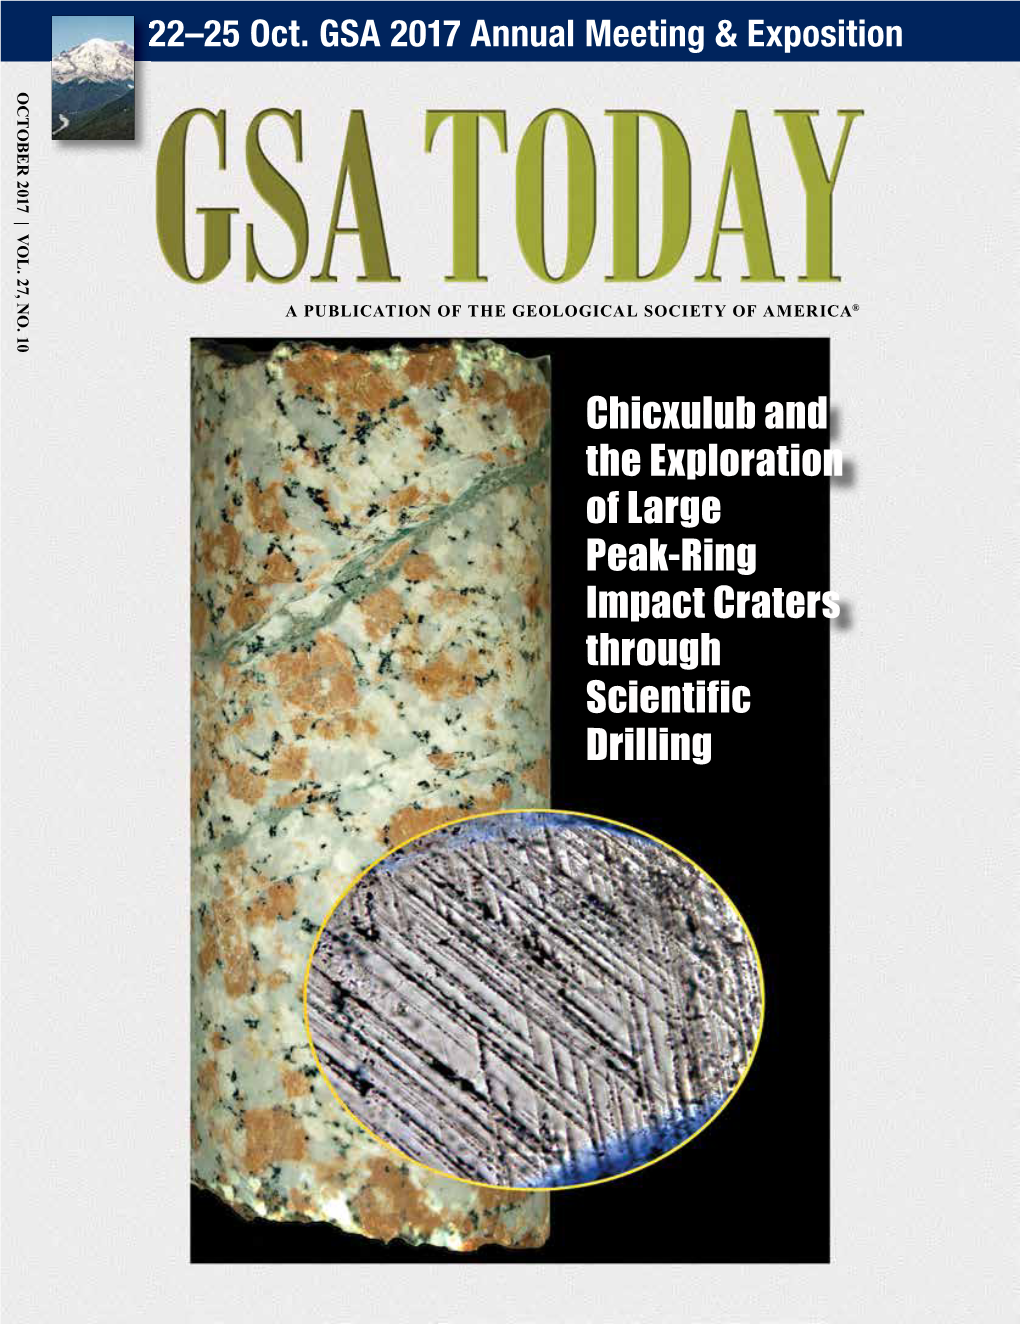 Chicxulub and the Exploration of Large Peak-Ring Impact Craters Through Scientific Drilling GSA TODAY (ISSN 1052-5173 USPS 0456-530) Prints News David A